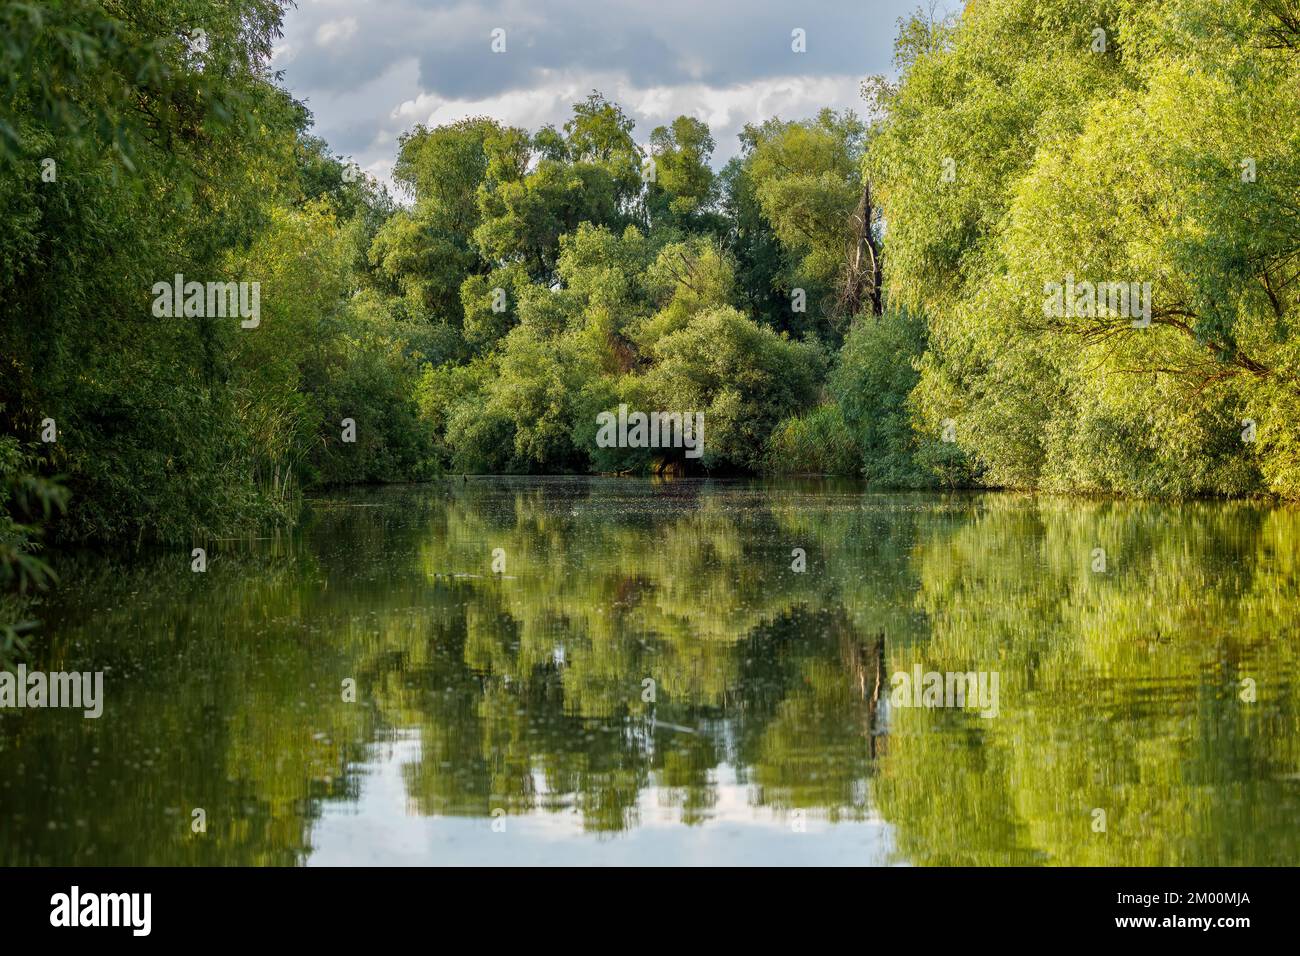 The Lakes and Canals of the Danube Delta in Romania Stock Photo